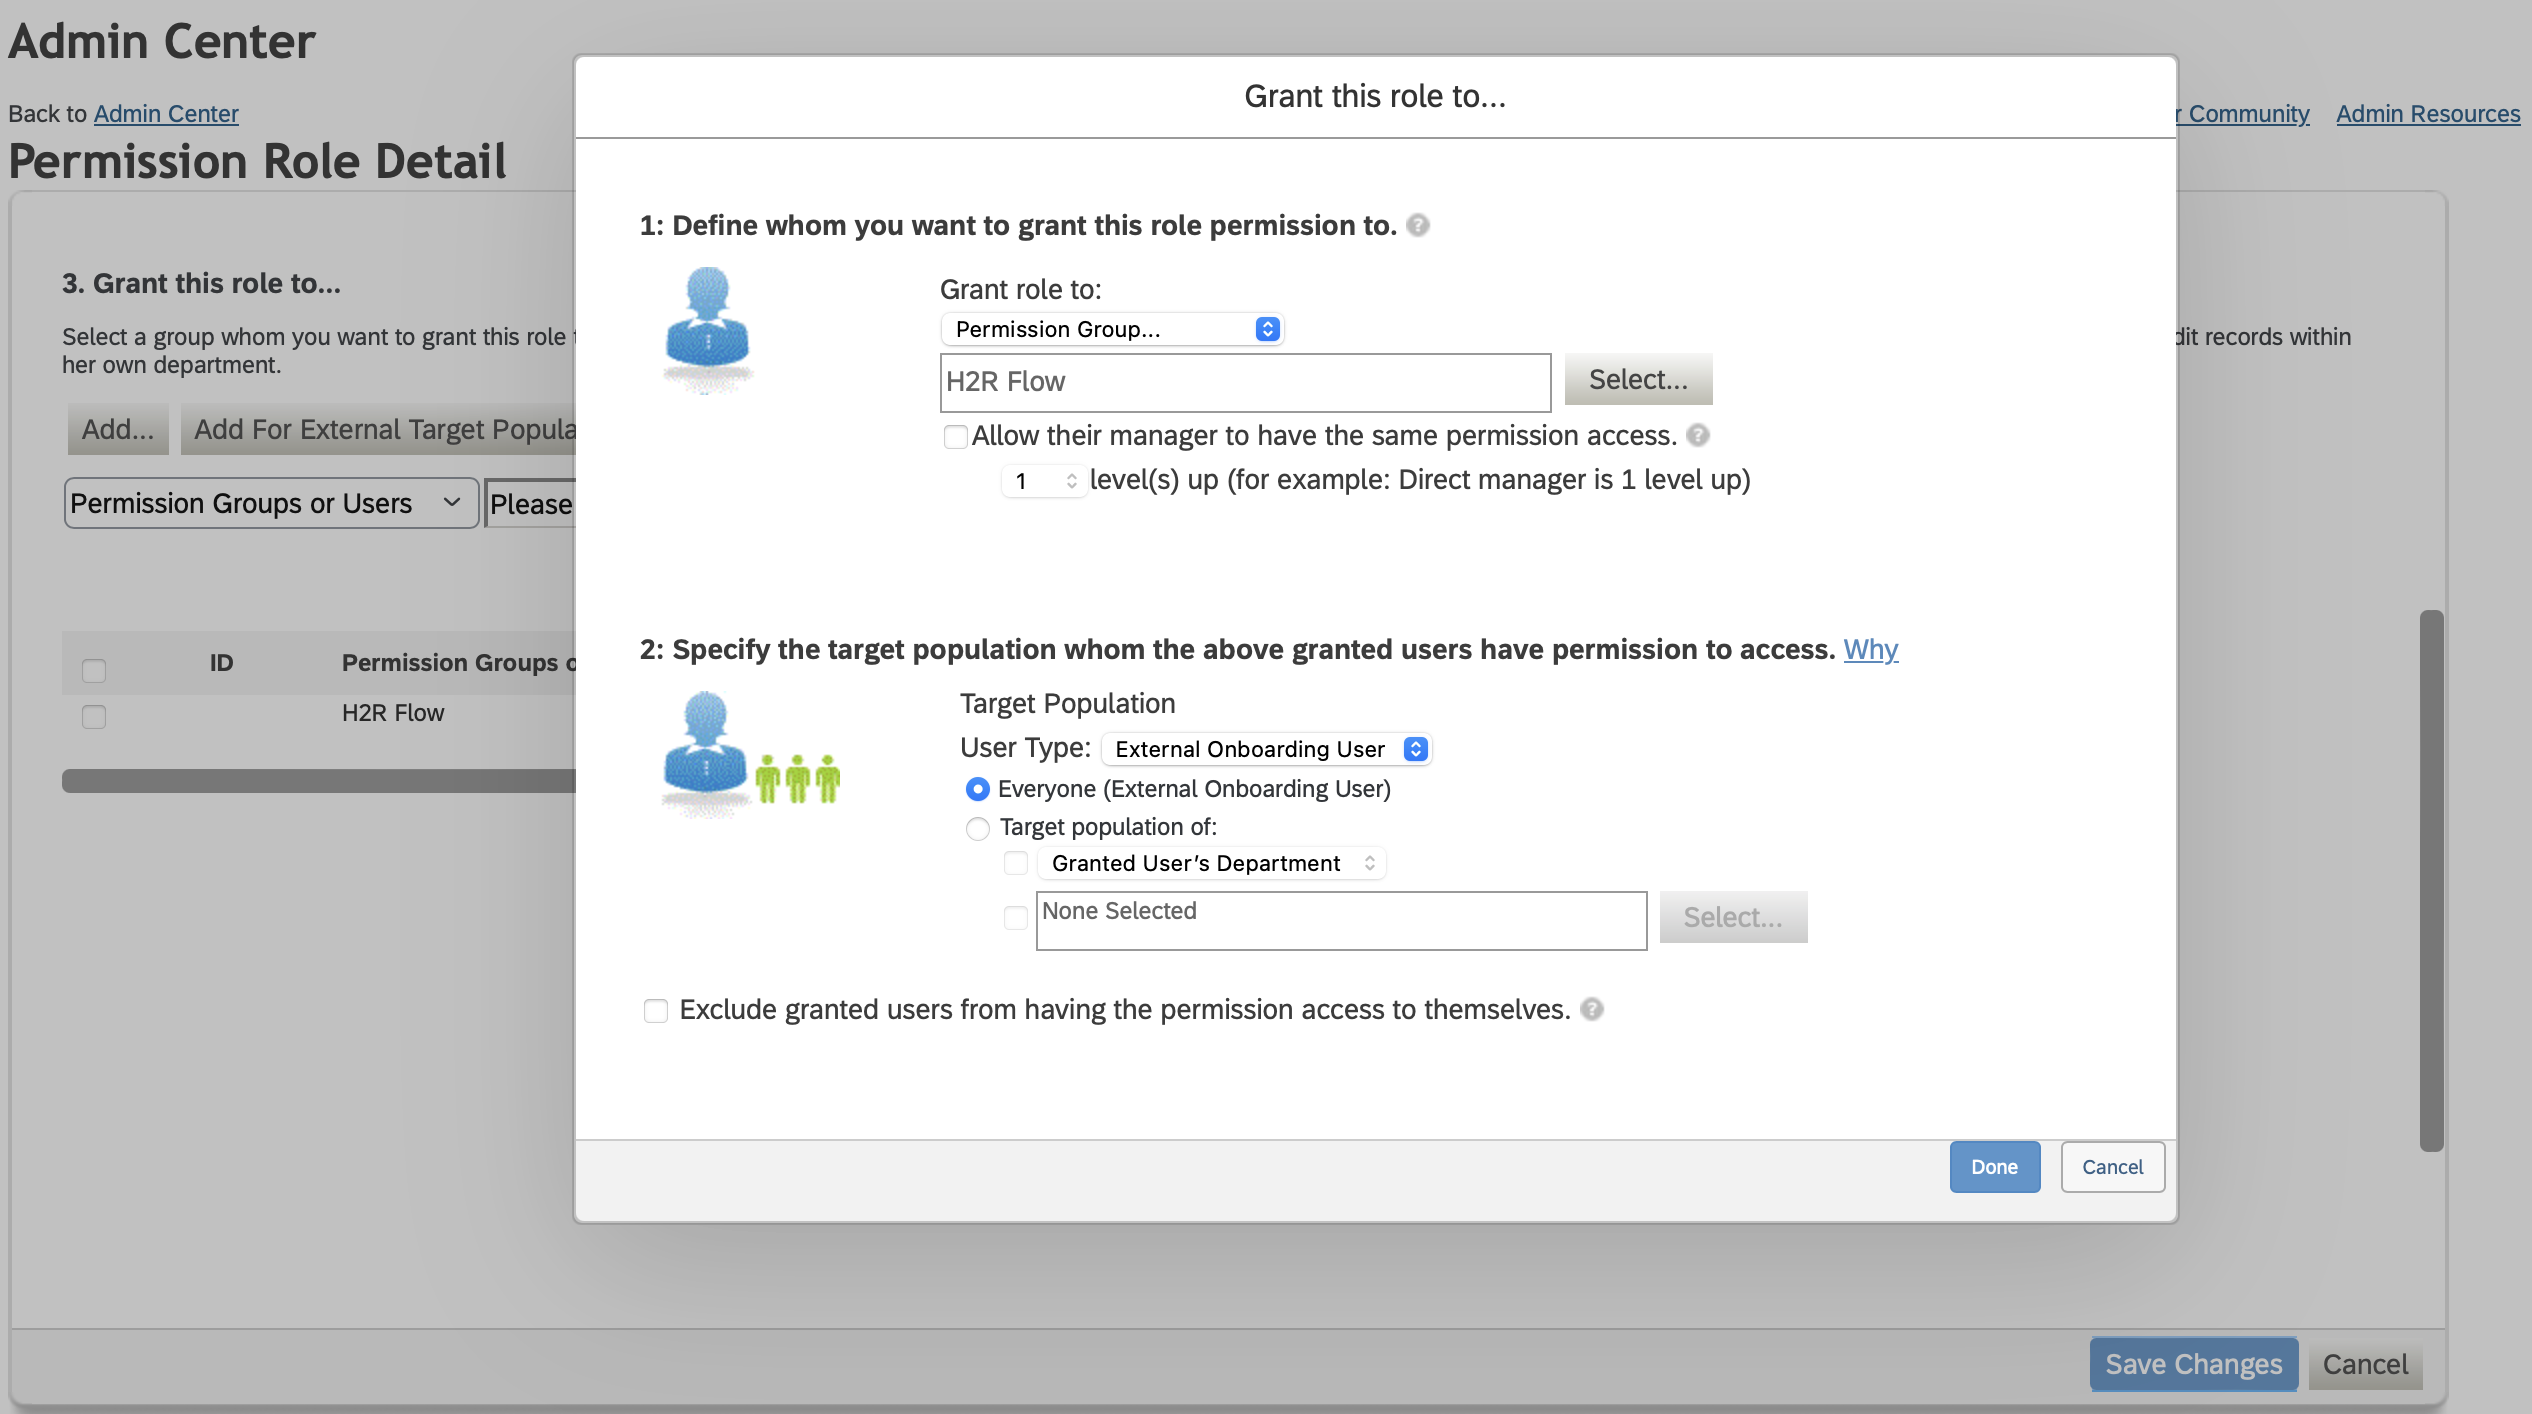 Grant Permission Roles for Onboarding Users